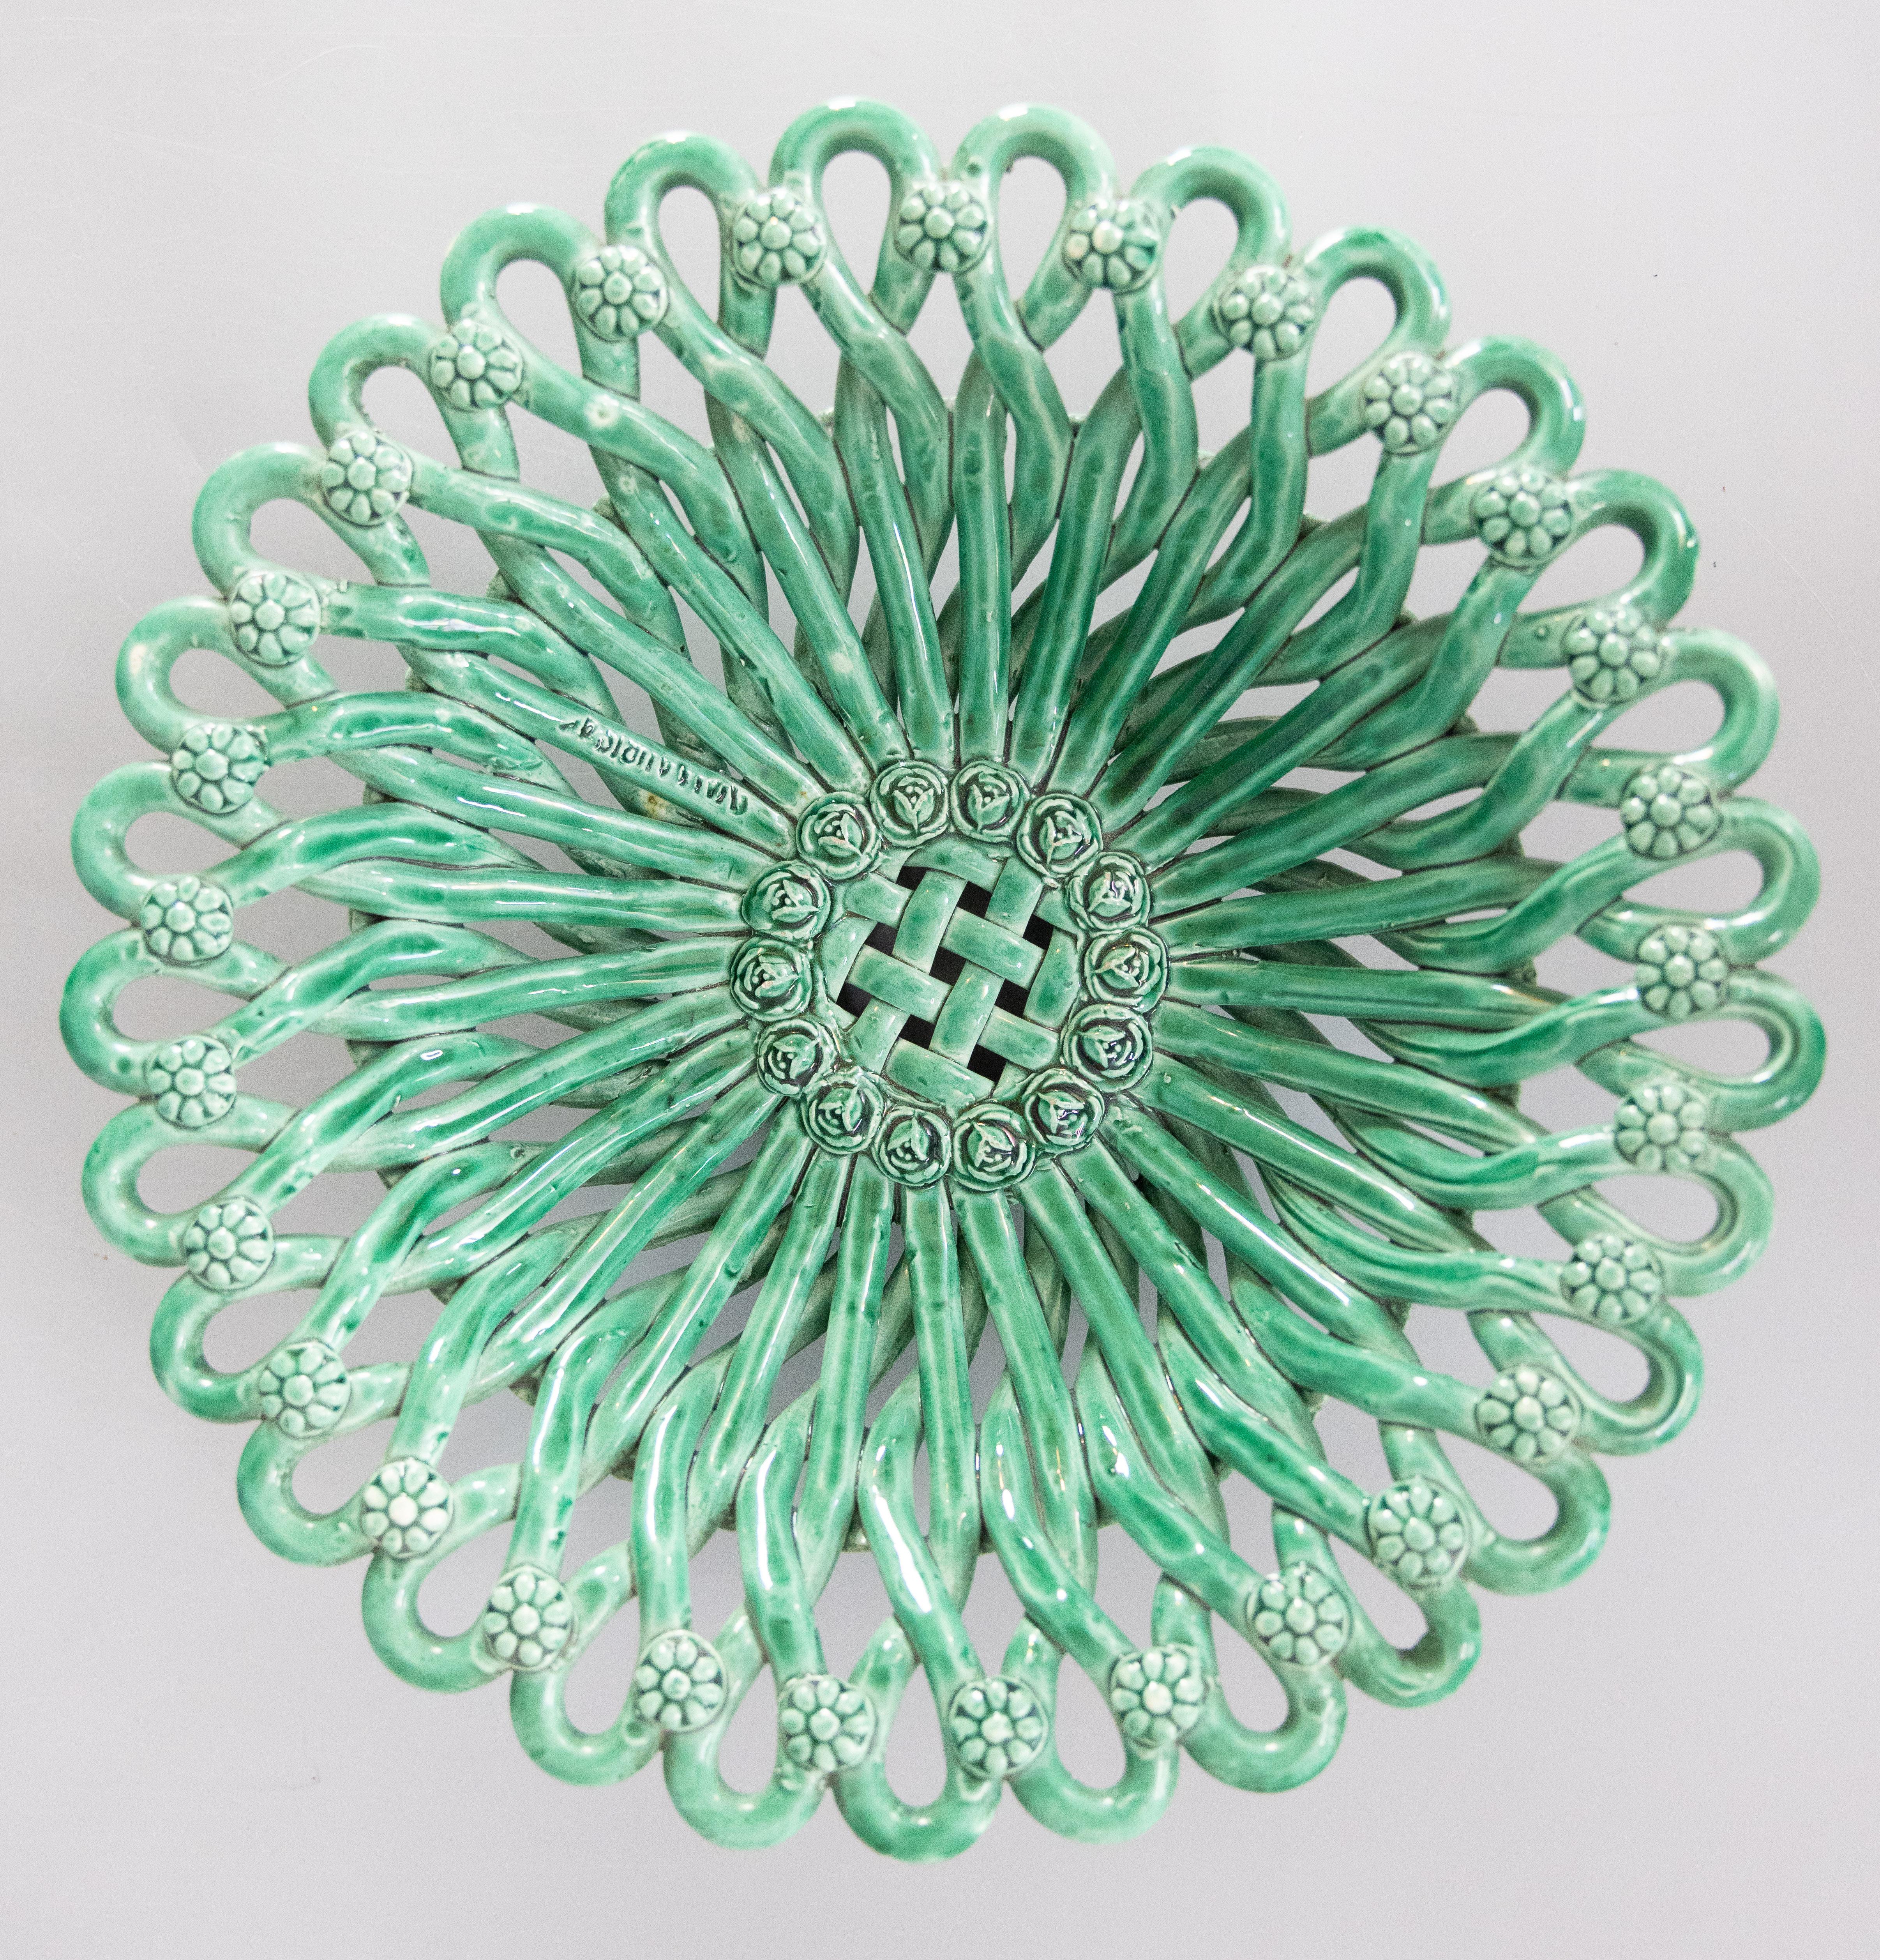 French Vallauris Majolica Emerald Green Reticulated Centerpiece Bowl, Circa 1940 For Sale 5